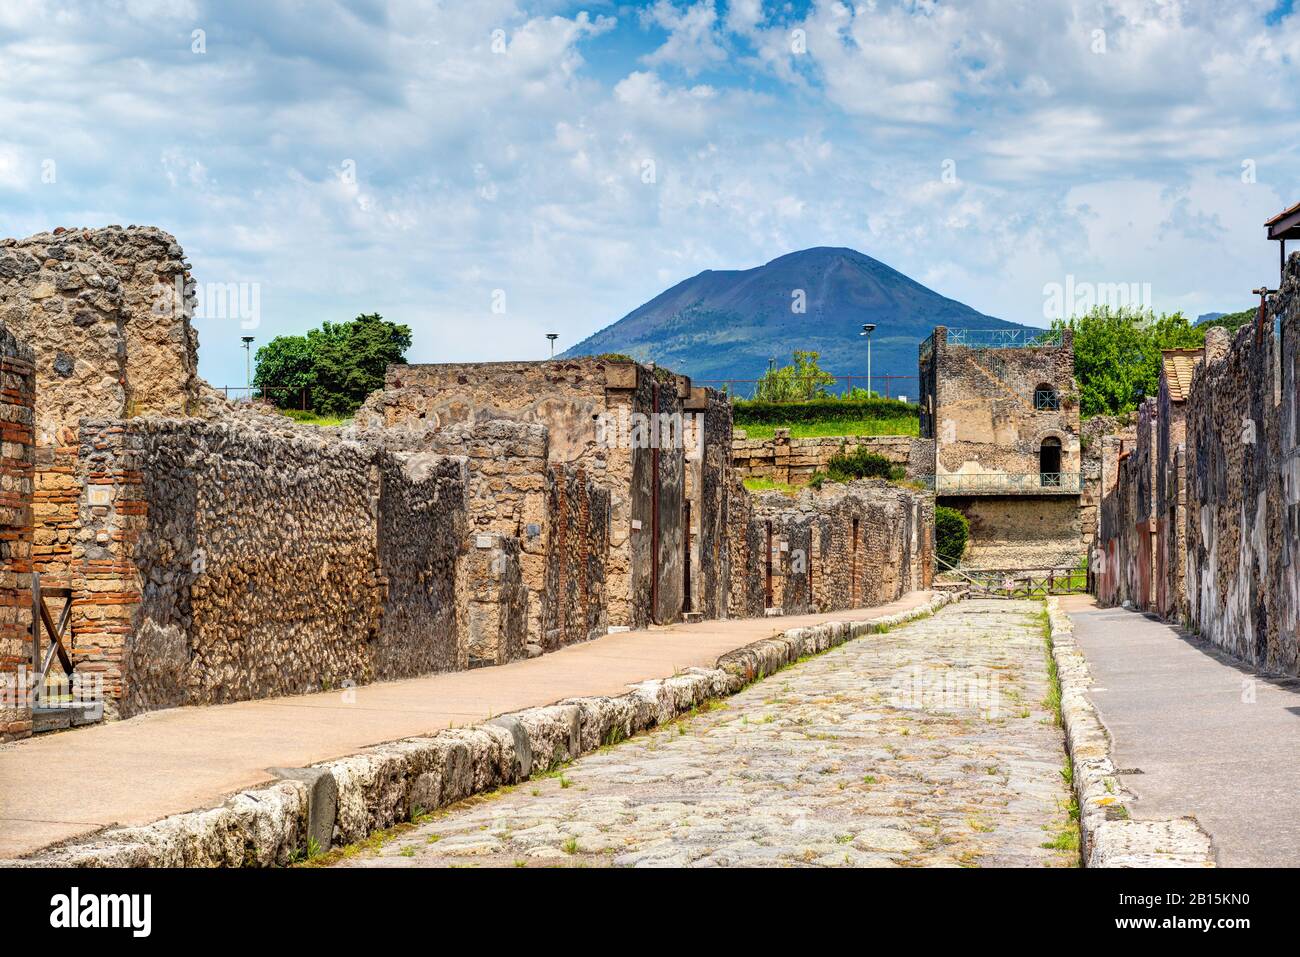 Street in Pompeii overlooking the Vesuvius. Pompeii is an ancient Roman city died from the eruption of Mount Vesuvius in 79 AD. Stock Photo